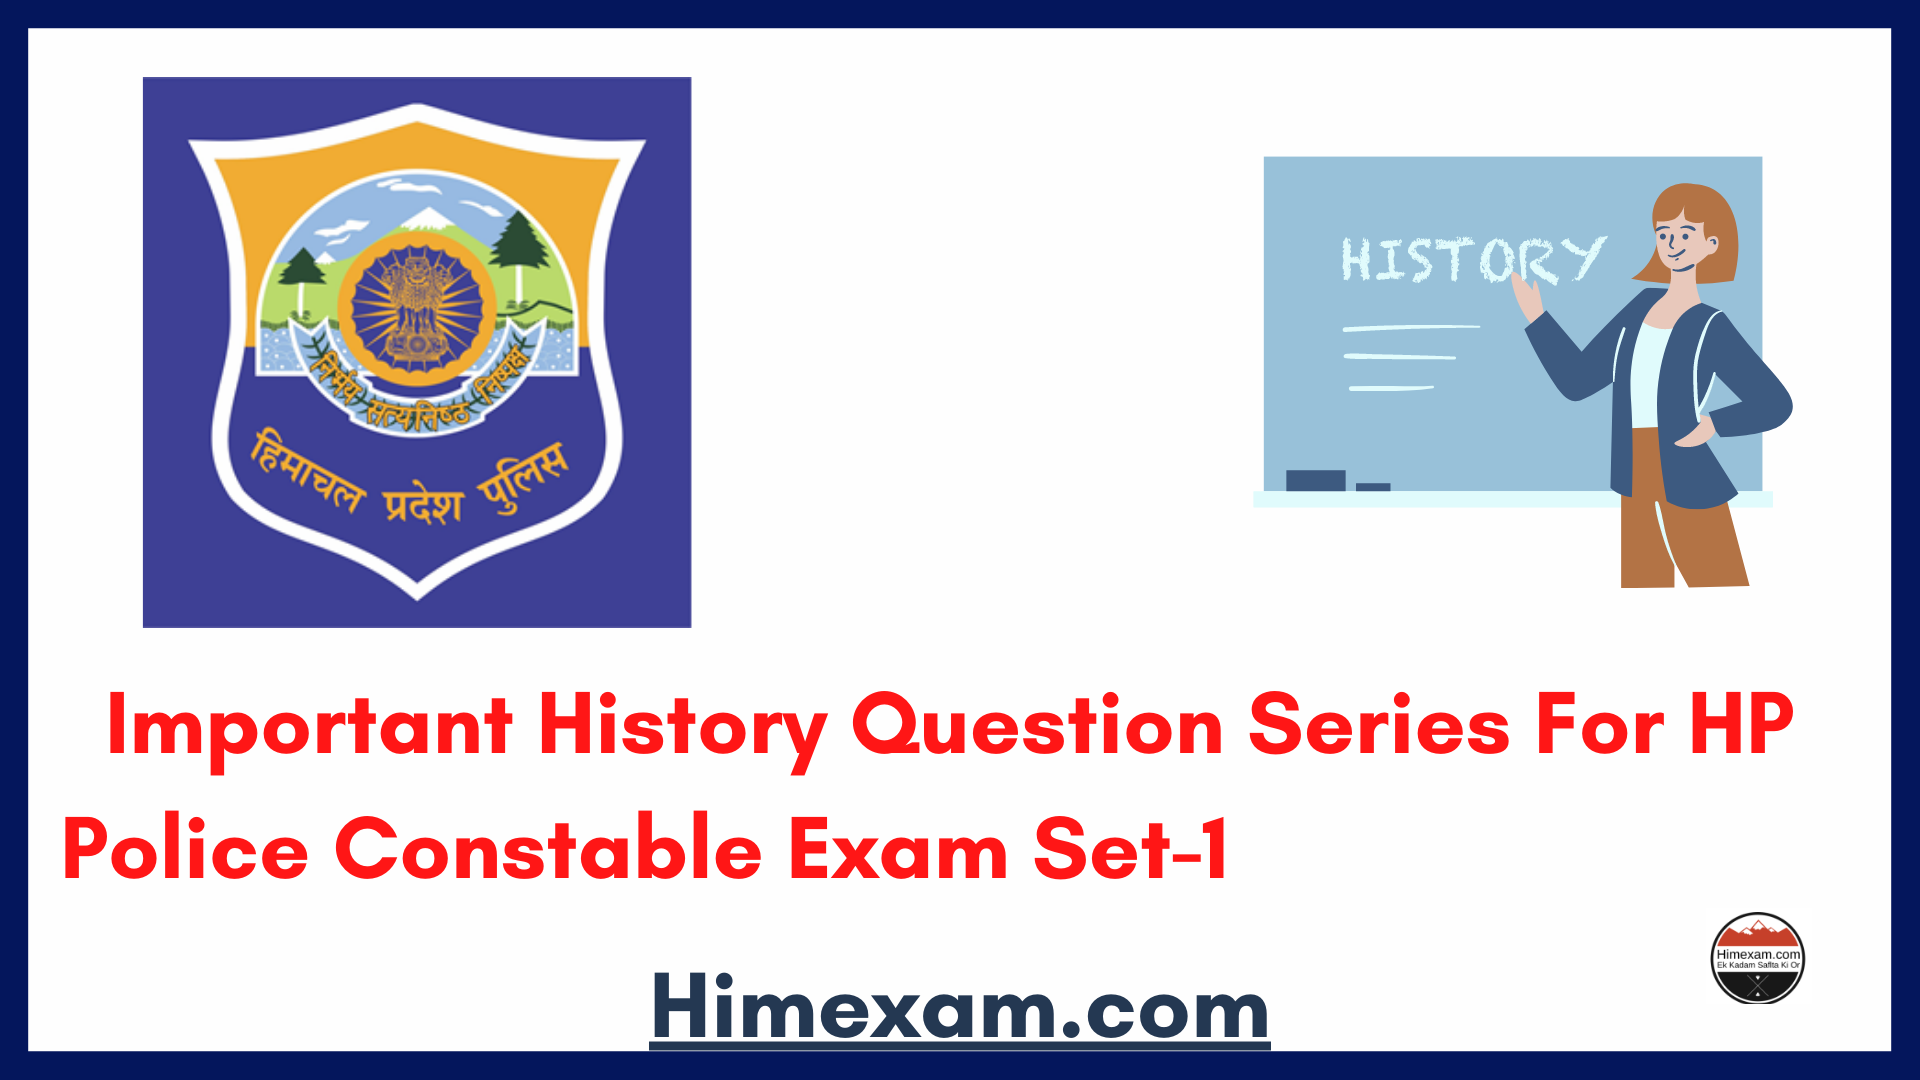 Important History  Question Series For HP Police Constable Exam Set-1